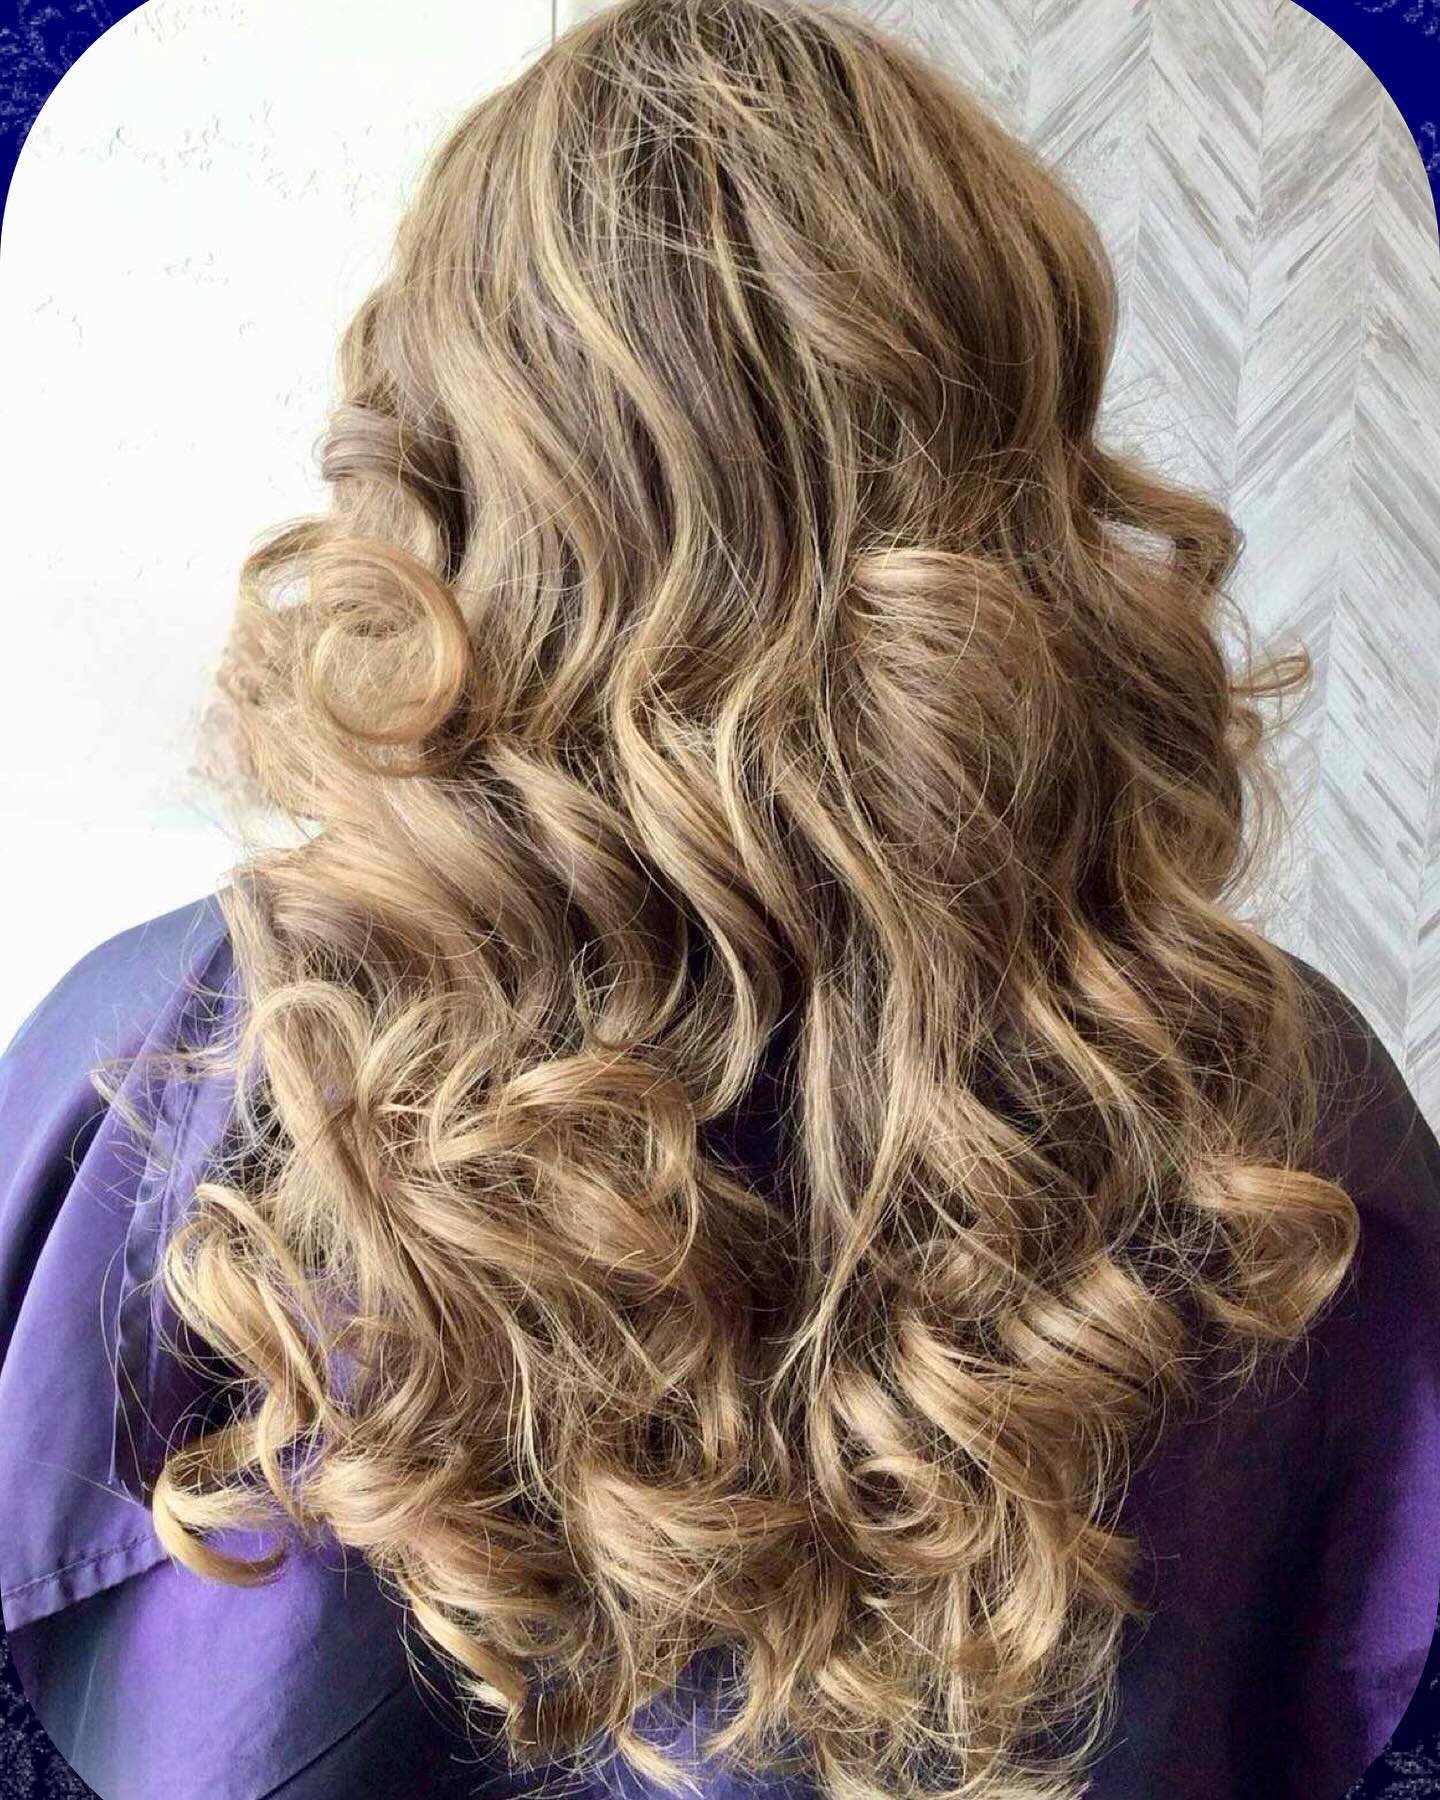 Cindy&rsquo;s good friend Ali wanted to go lighter and brighter. 🌞 so Cindy did a full head of foils and tipped out the ends. She did a cool balanced color gloss and a long layered haircut. 💛Anu did the blow dry and curling iron style finish 🎉 we 